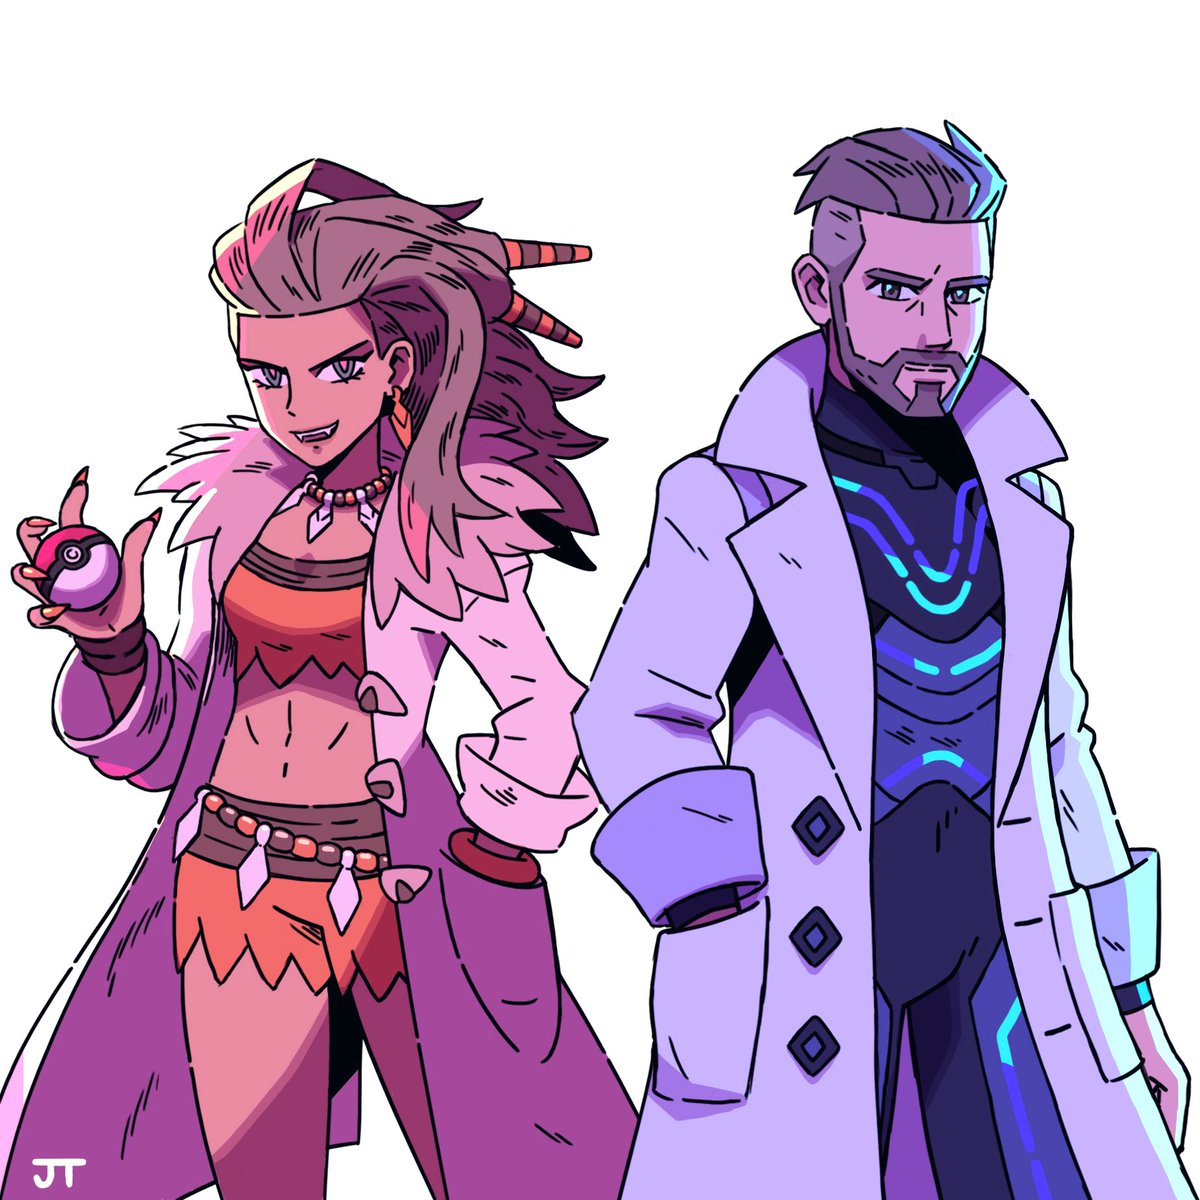 Sada and Turo. I designed these professors for Pokémon Scarlet and Violet.